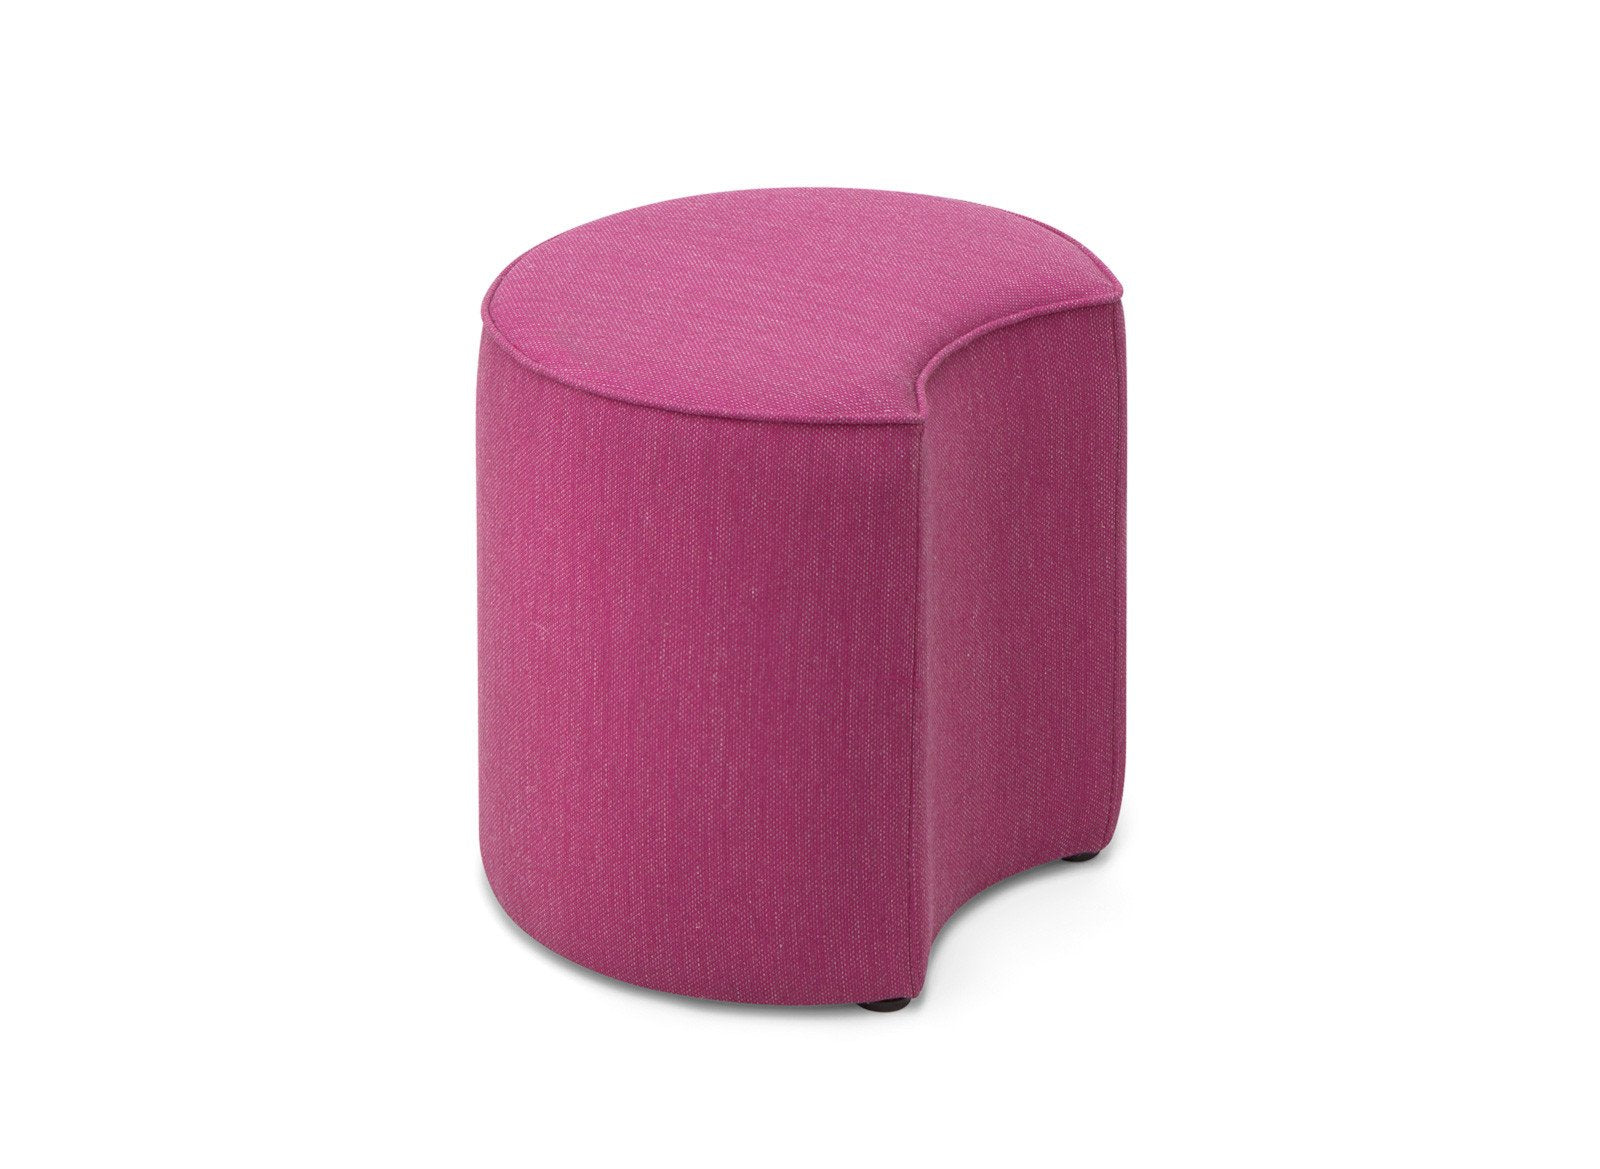 Bloom 1 Moon Low Stool-Torre-Contract Furniture Store